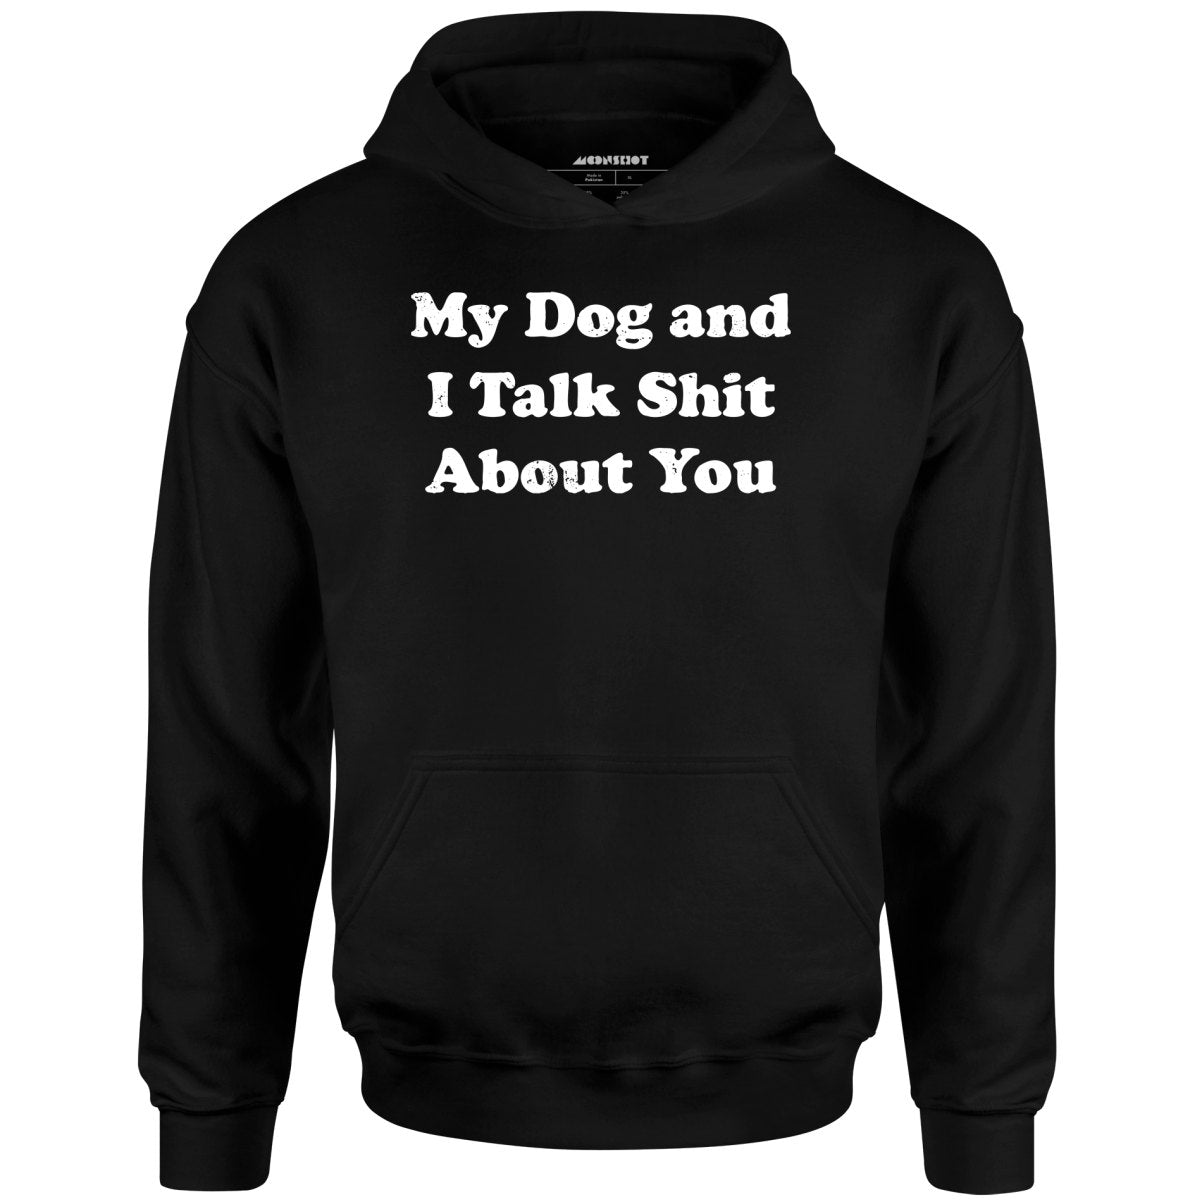 My Dog and I Talk Shit About You - Unisex Hoodie